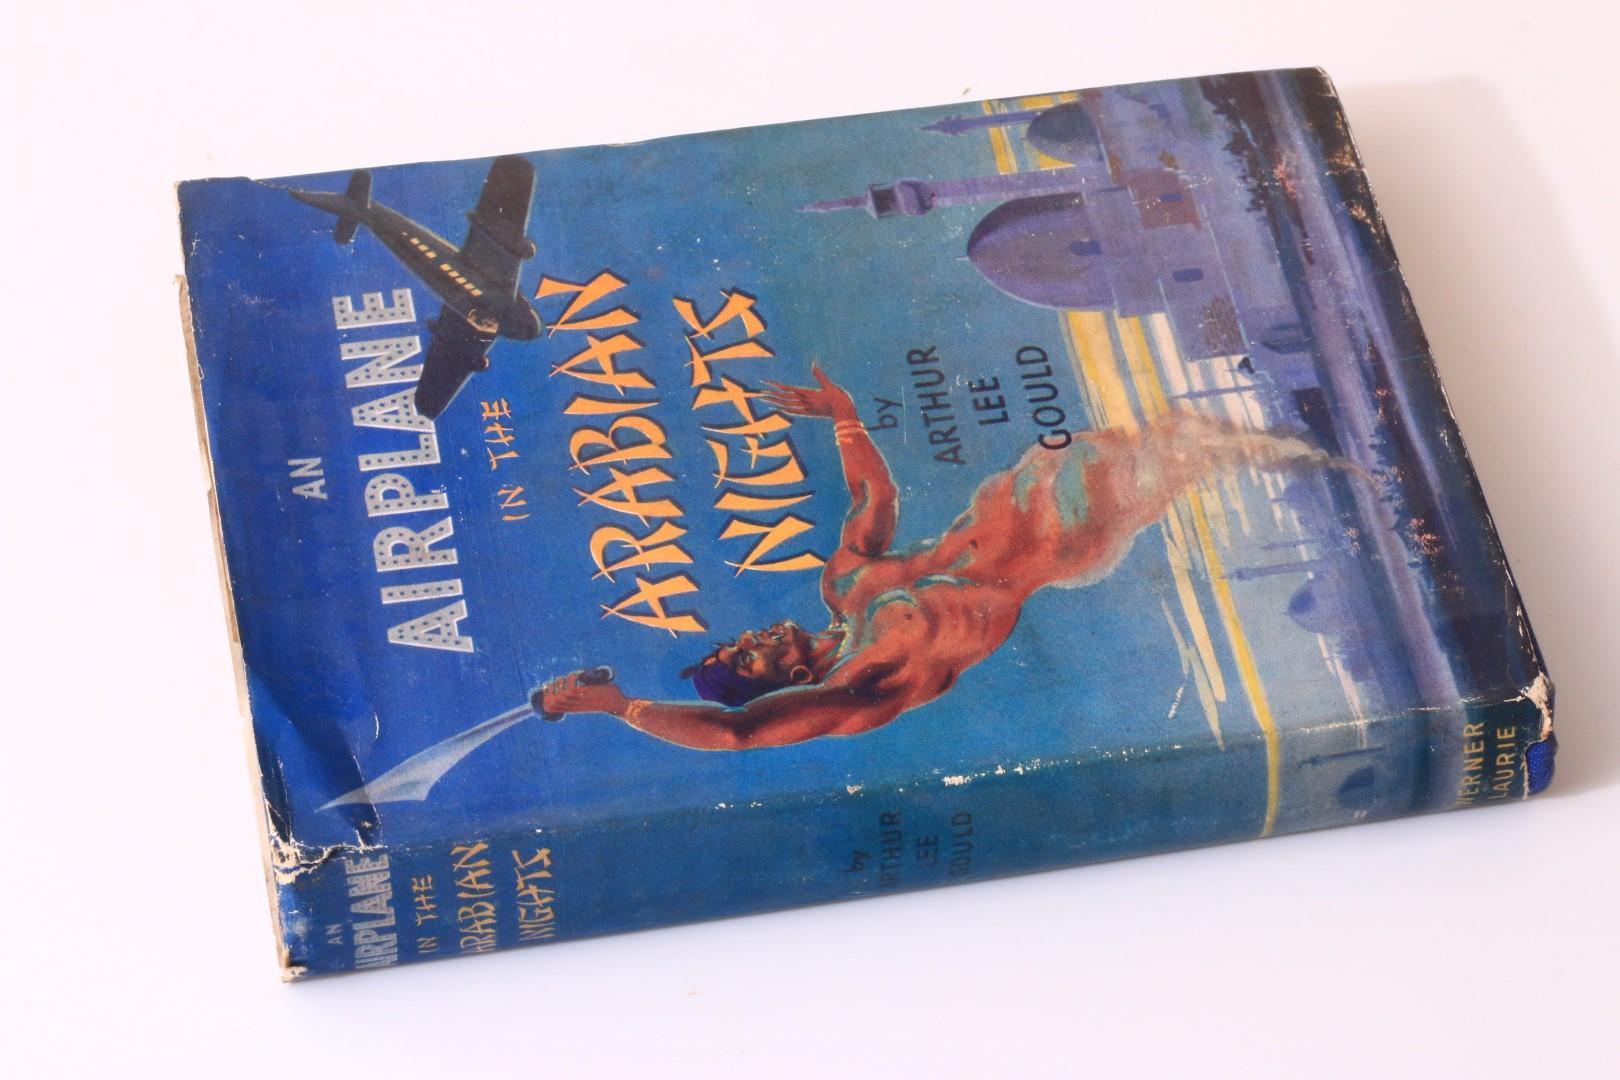 Arthur Lee Gould - An Airplane in the Arabian Nights - T. Werner Laurie, 1947, Signed First Edition.